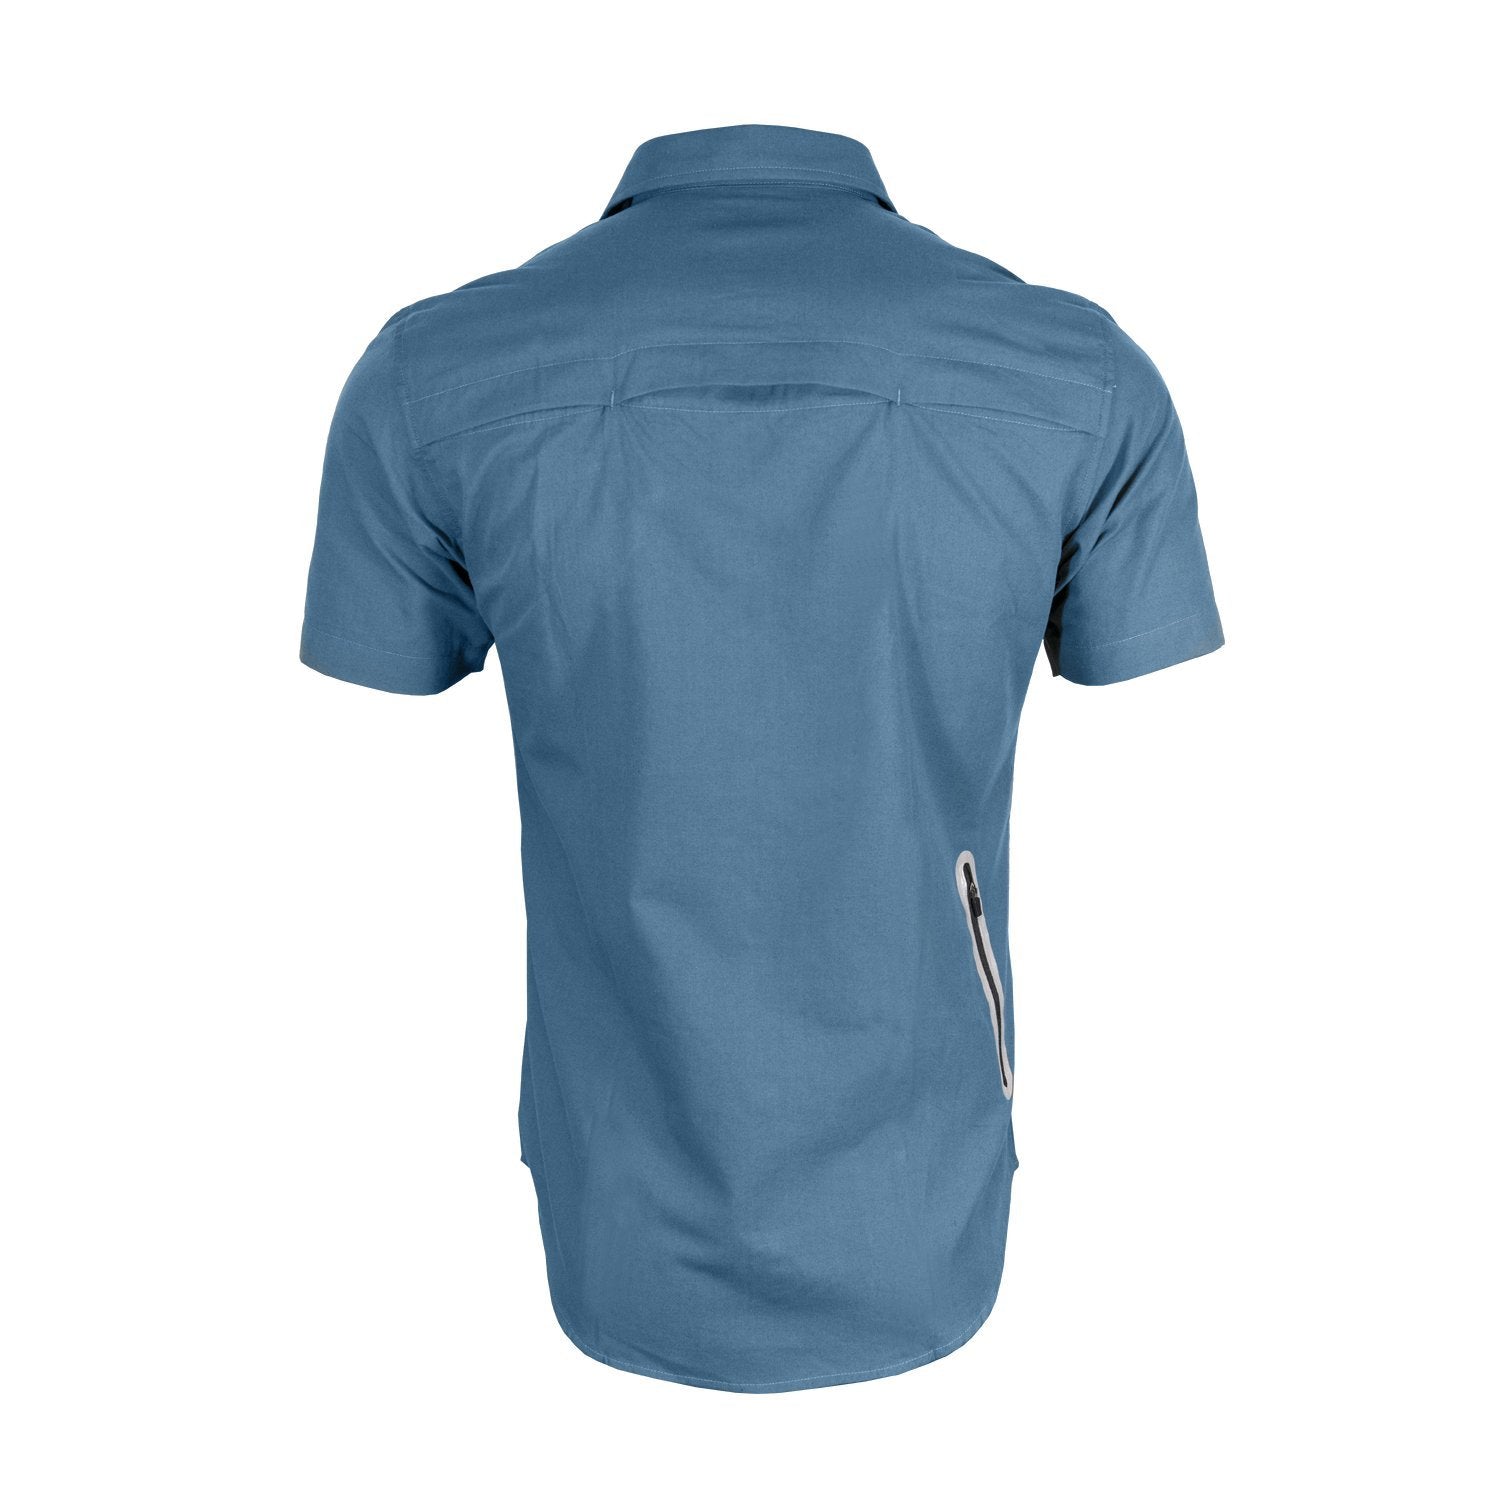 The Pedaler's Pub Shirt - Short Sleeve Casual Urban Commuter Cycling Jersey with Snaps, Zipper Pockets, and Dry Fast Wicking Small / Charcoal